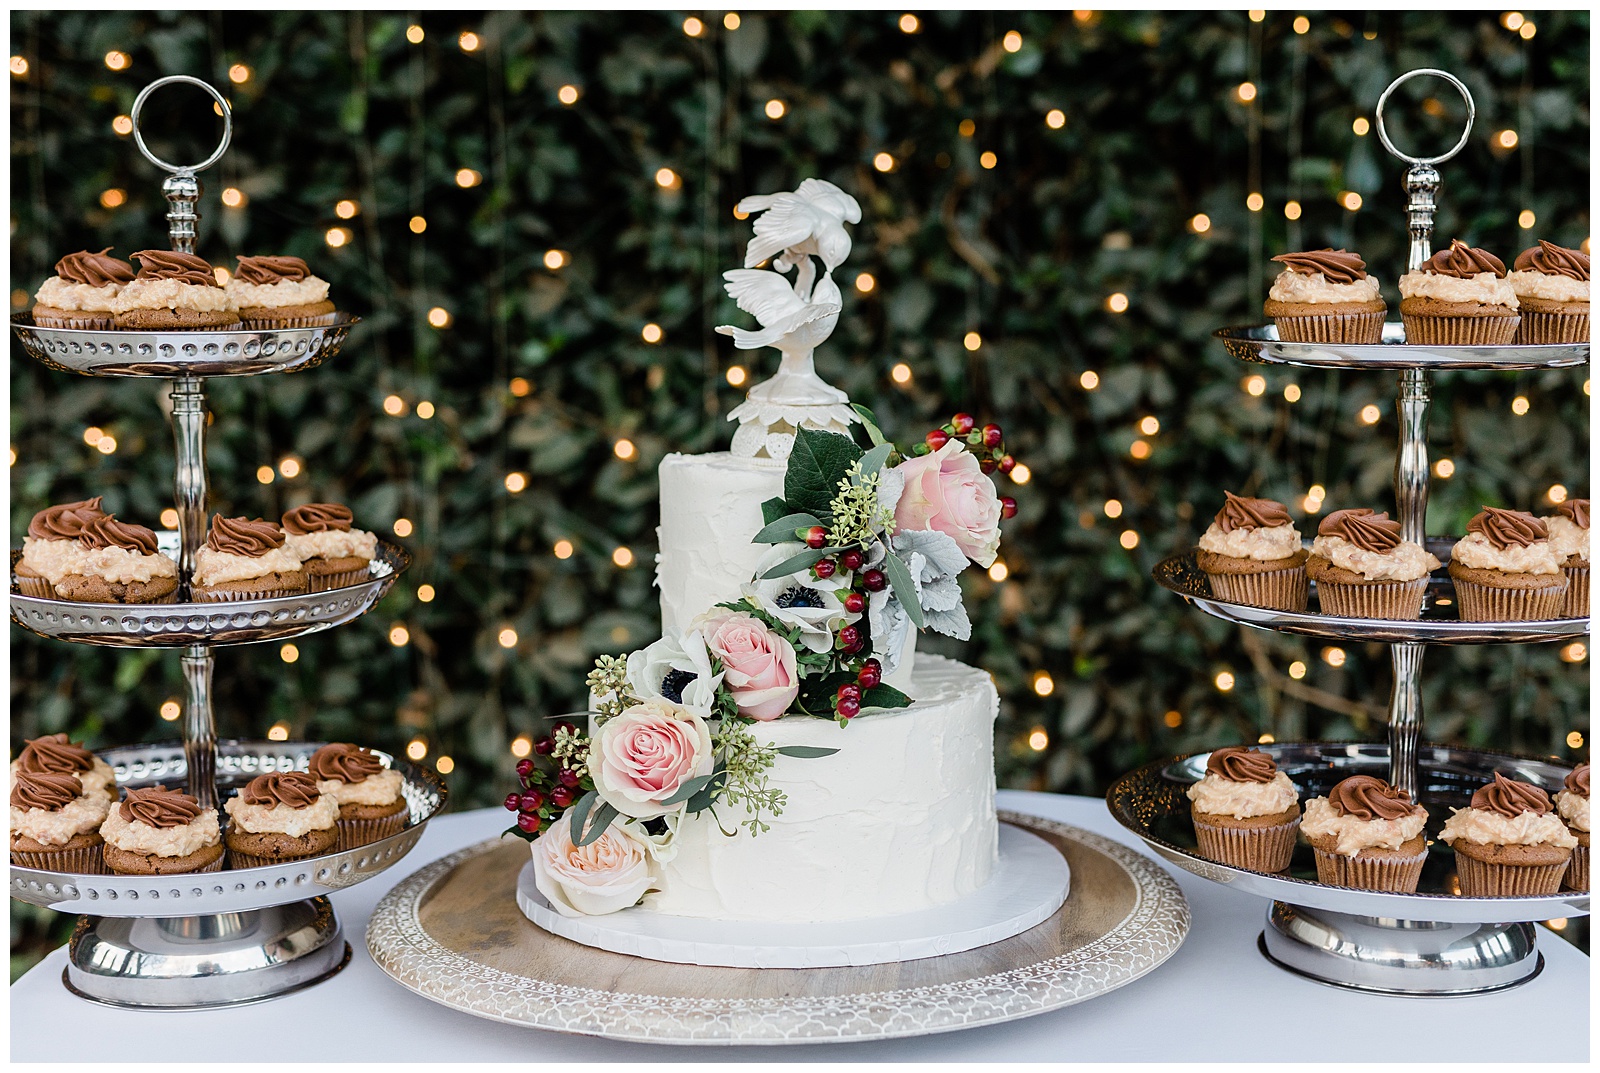 cakes and cupcakes at a reception for a winter wedding in Bakersfield, CA